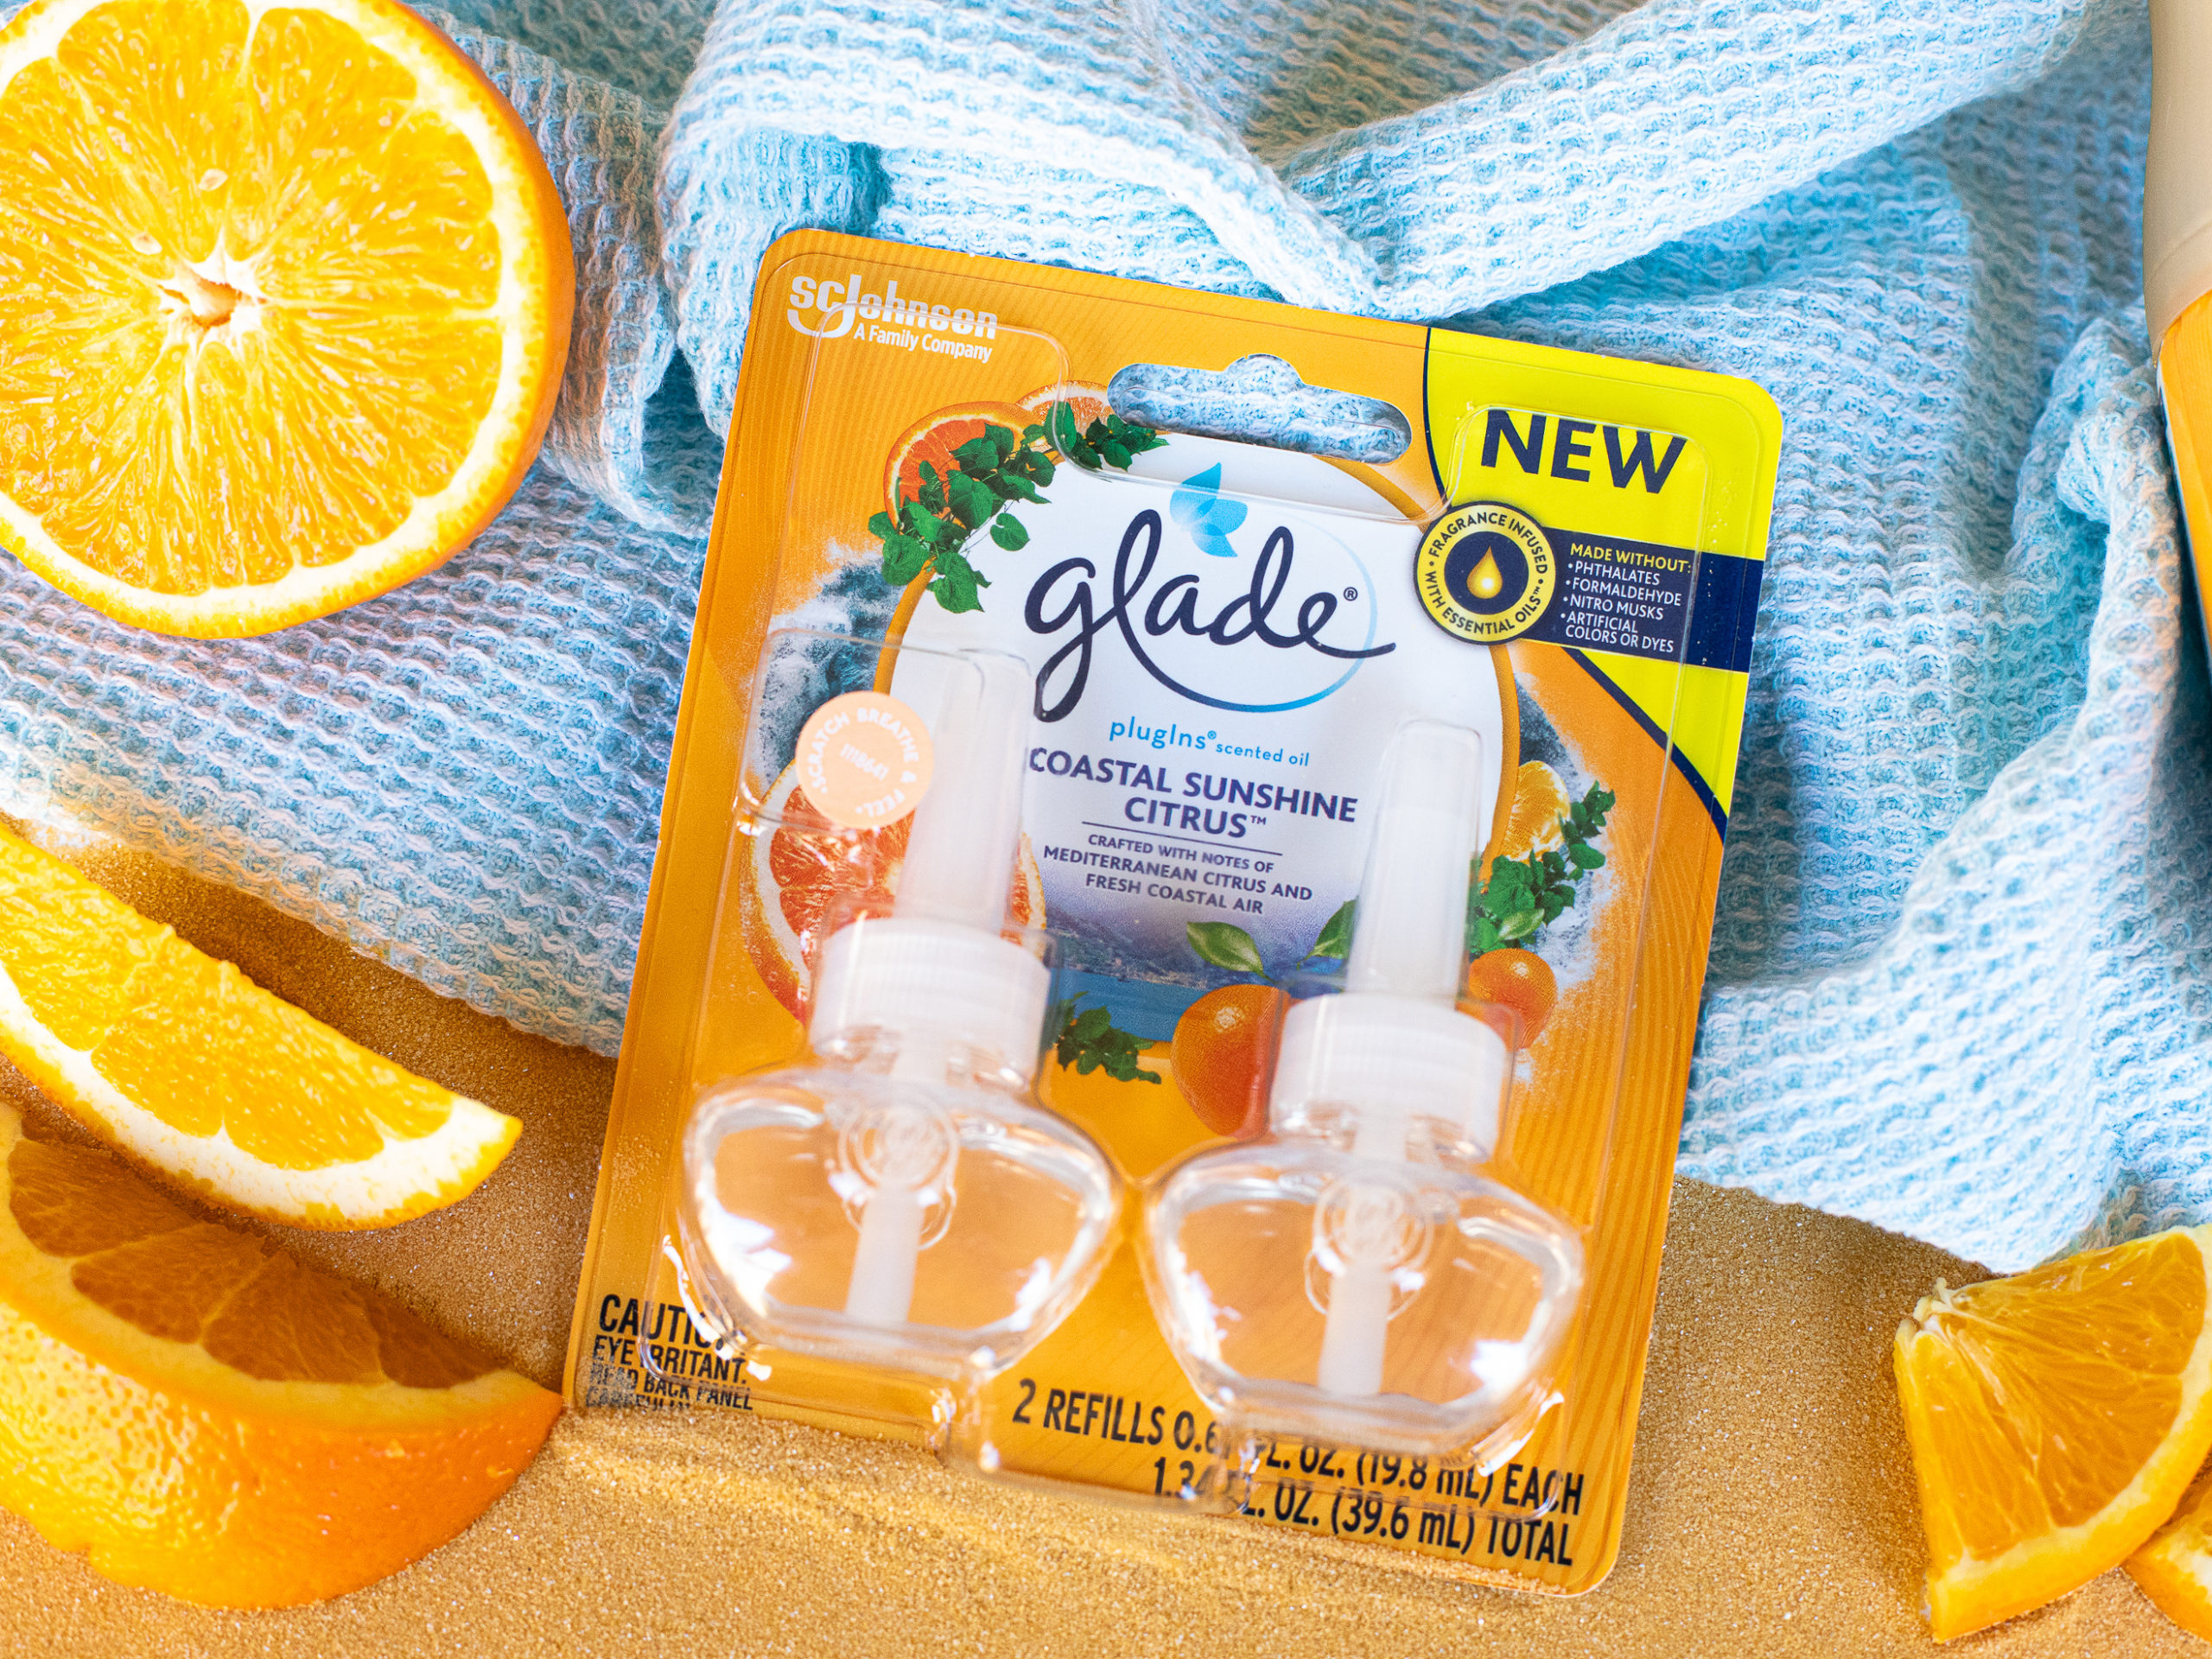 Bring The Feeling Of A Coastal Vacation To Your Home With NEW Glade® Coastal Sunshine Citrus Scent on I Heart Publix